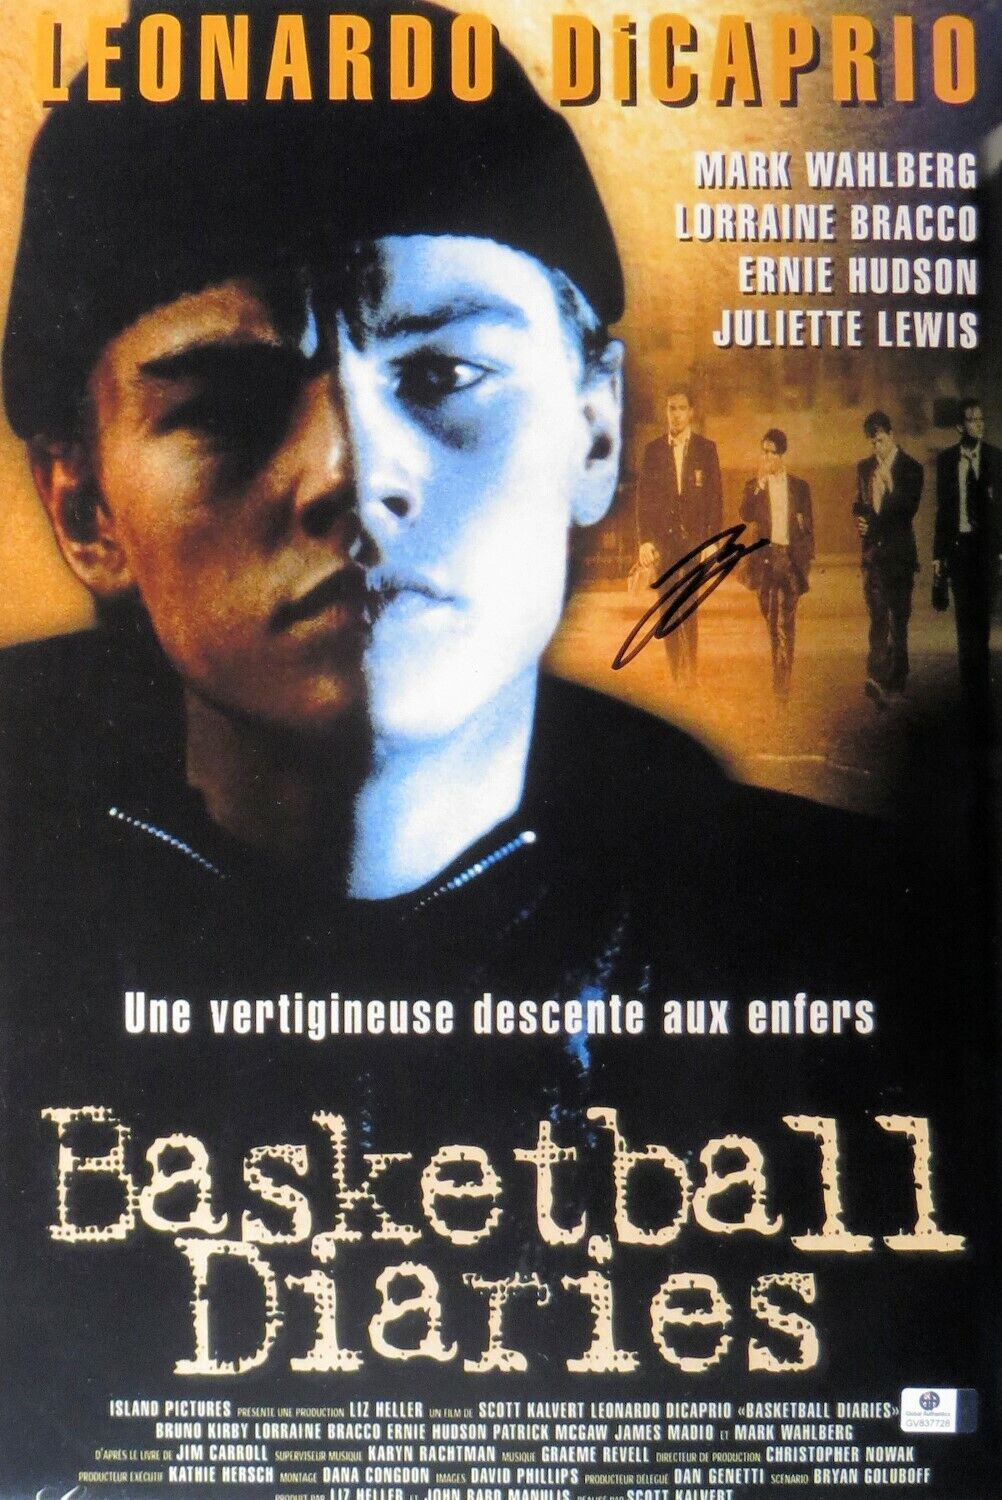 Leonardo DiCaprio Signed Autographed 12X18 Photo Poster painting Basketball Diaries GV837728